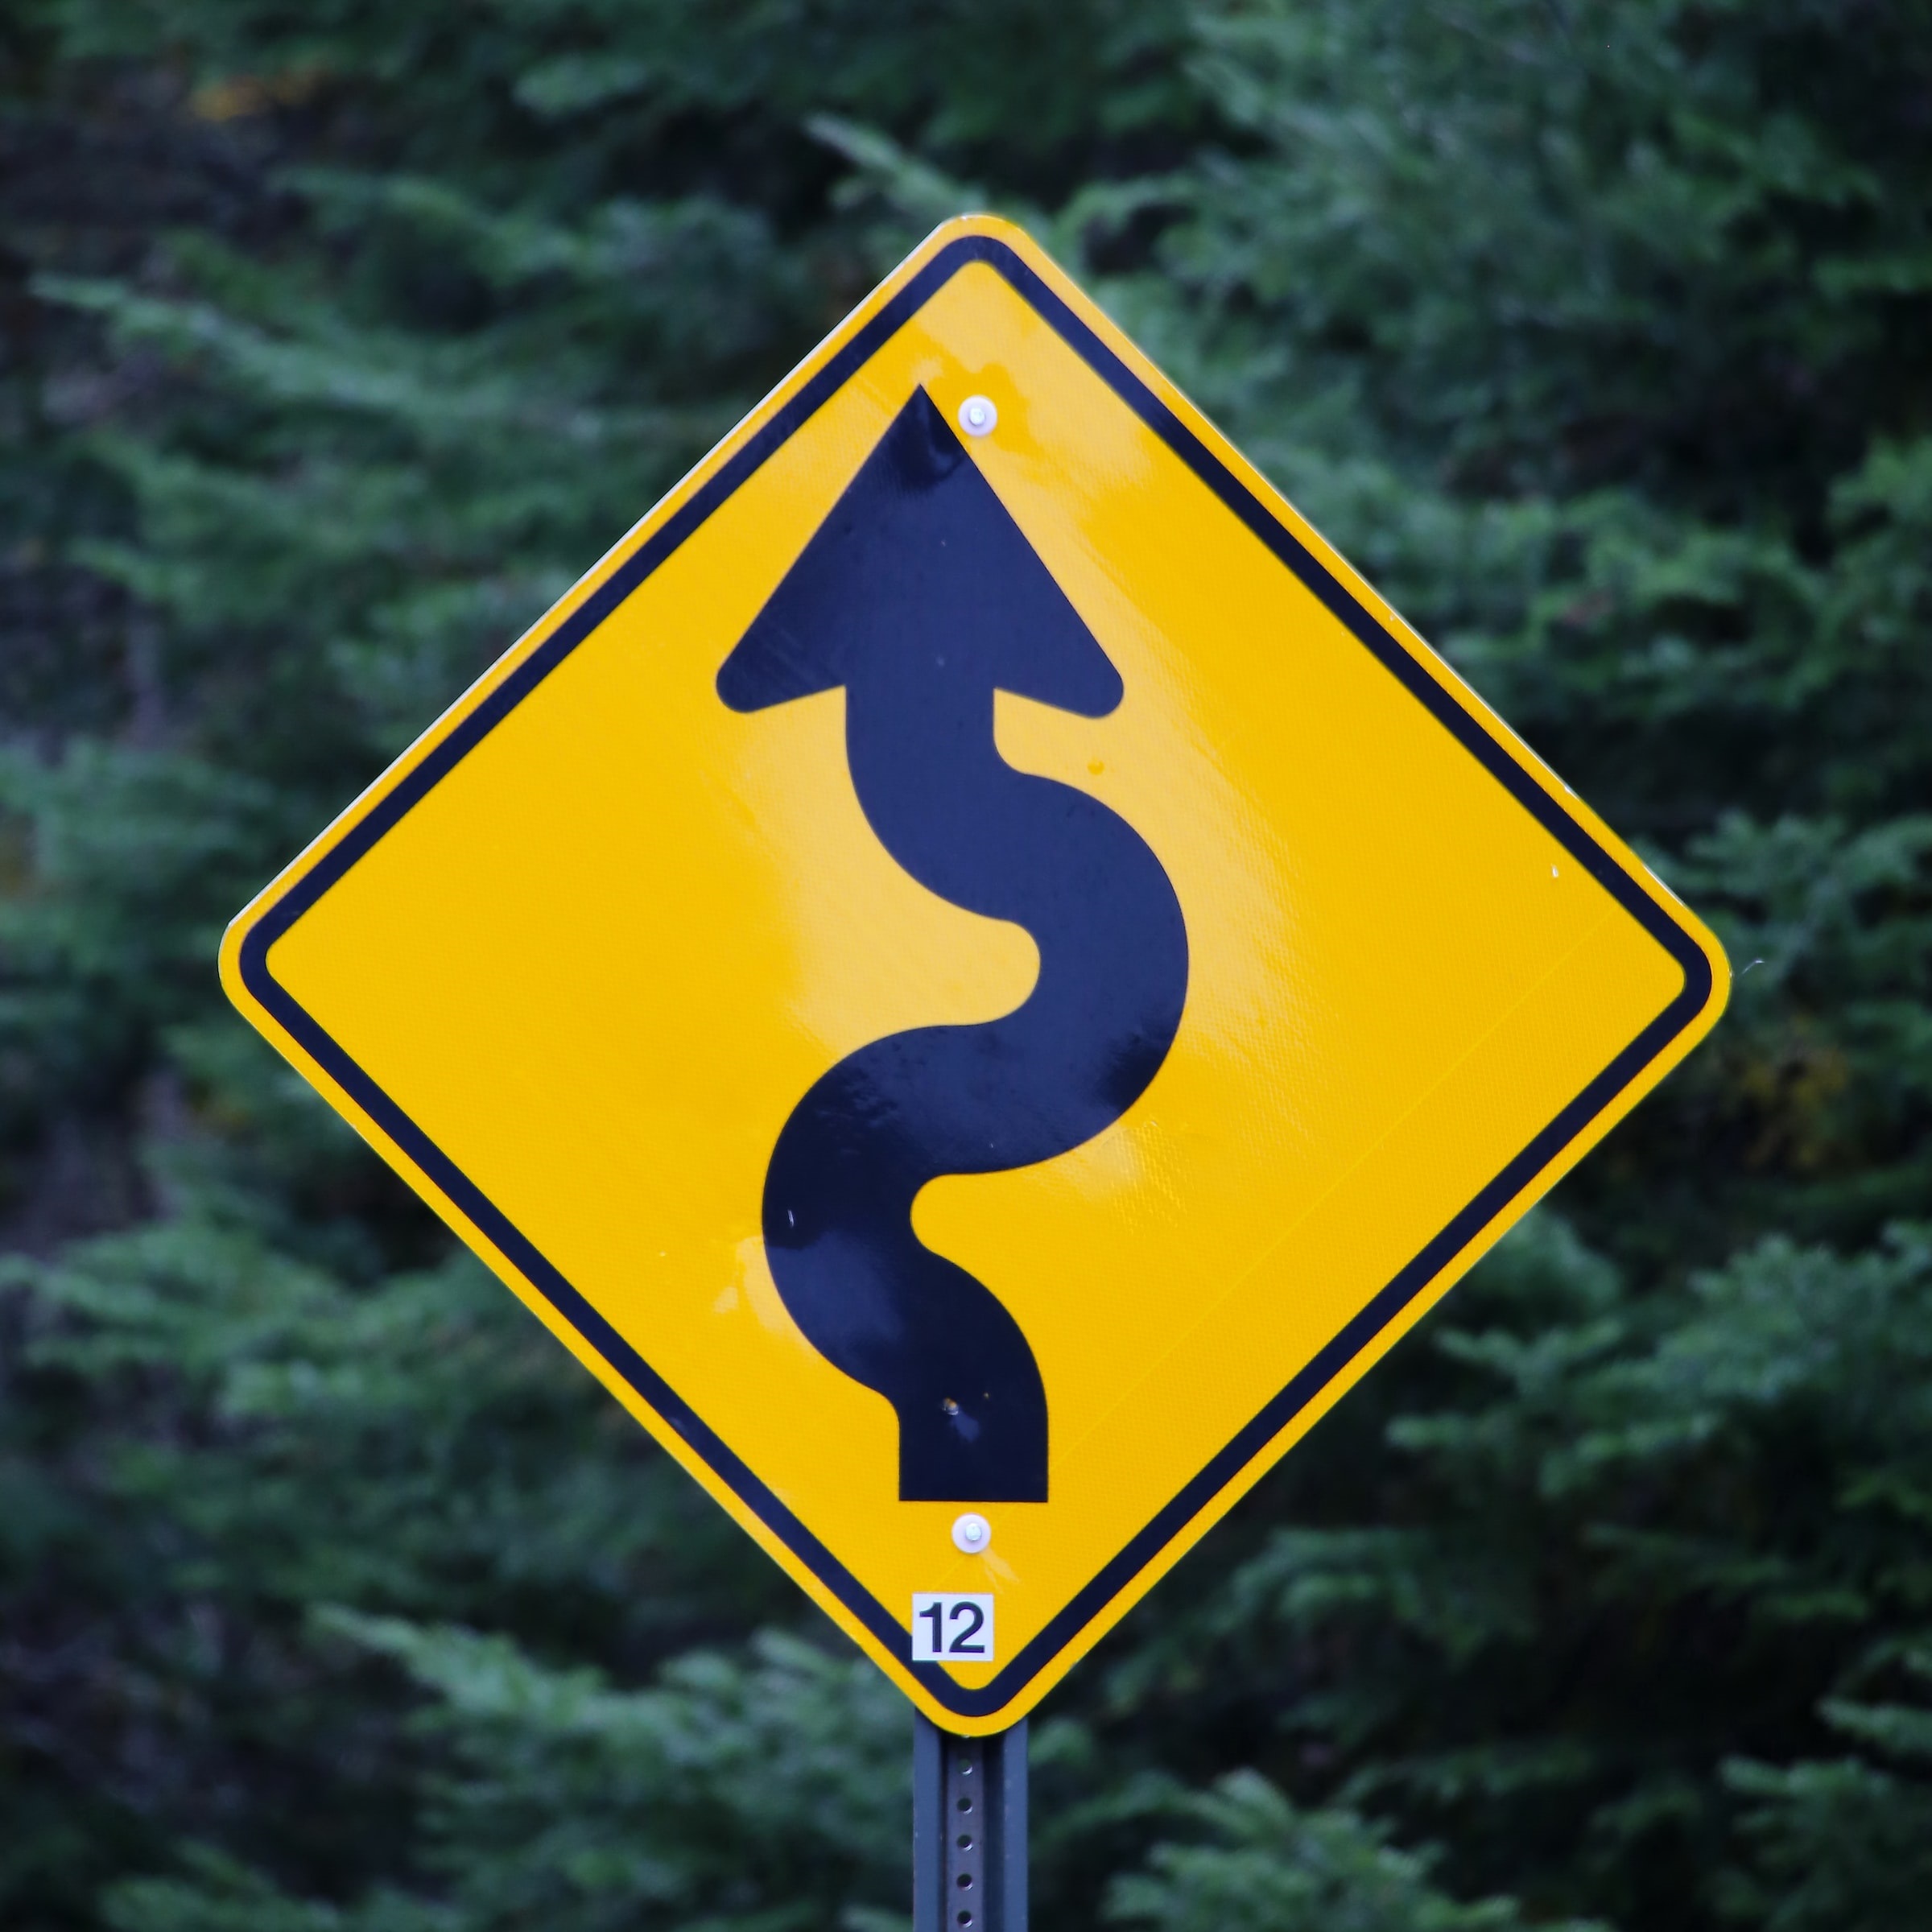 Diamond shaped road sign on which there is a black wavy arrow on a yellow background. The sign is situated in front of green trees.